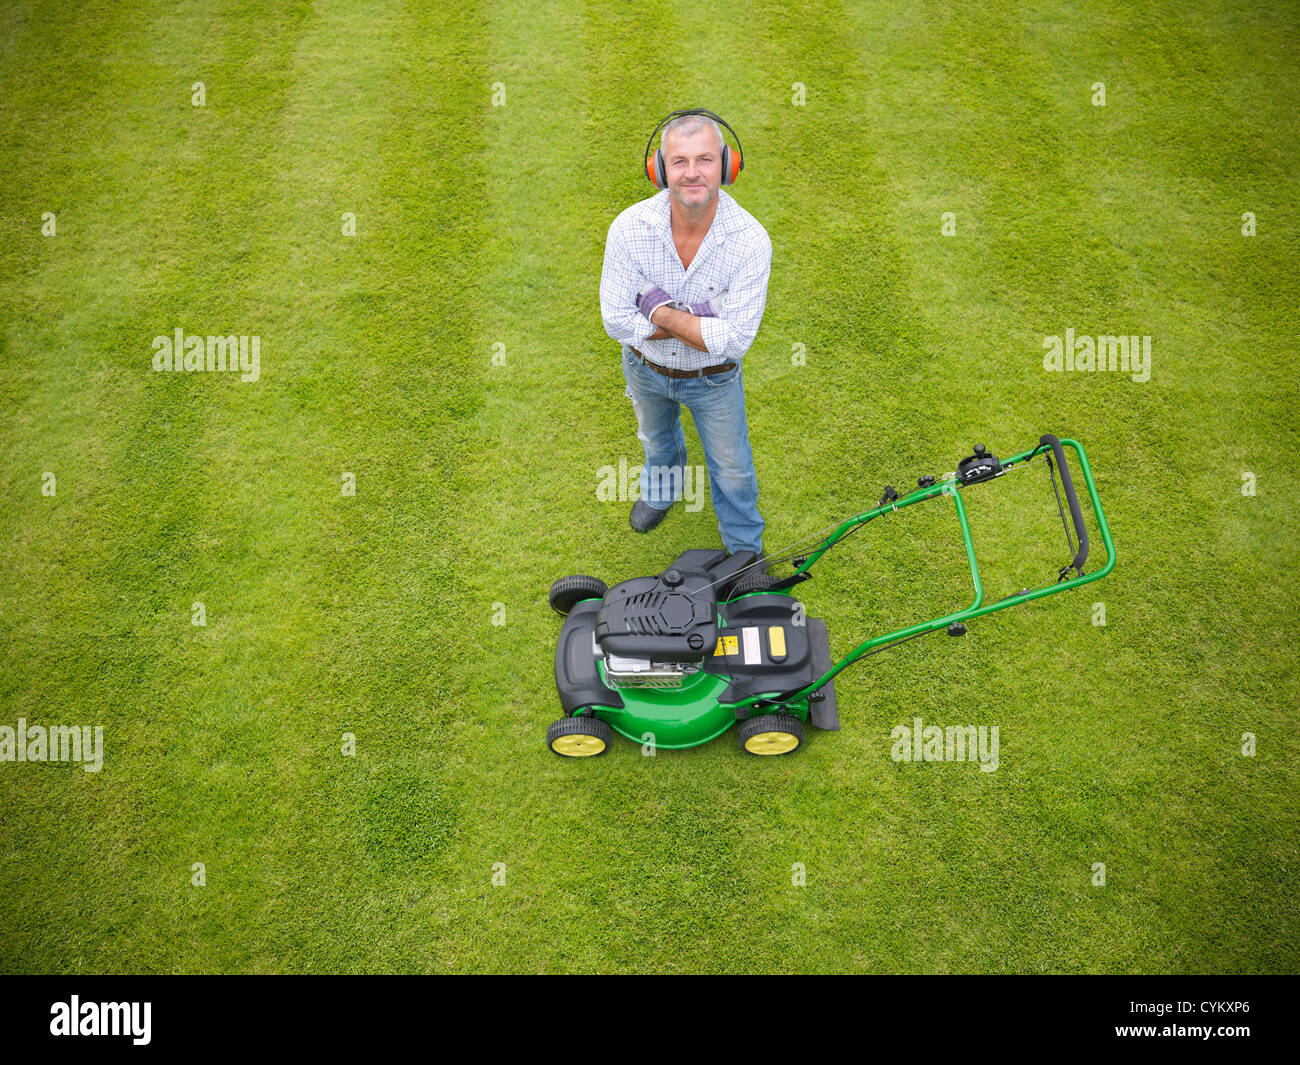 Man standing with lawn mower Stock Photo